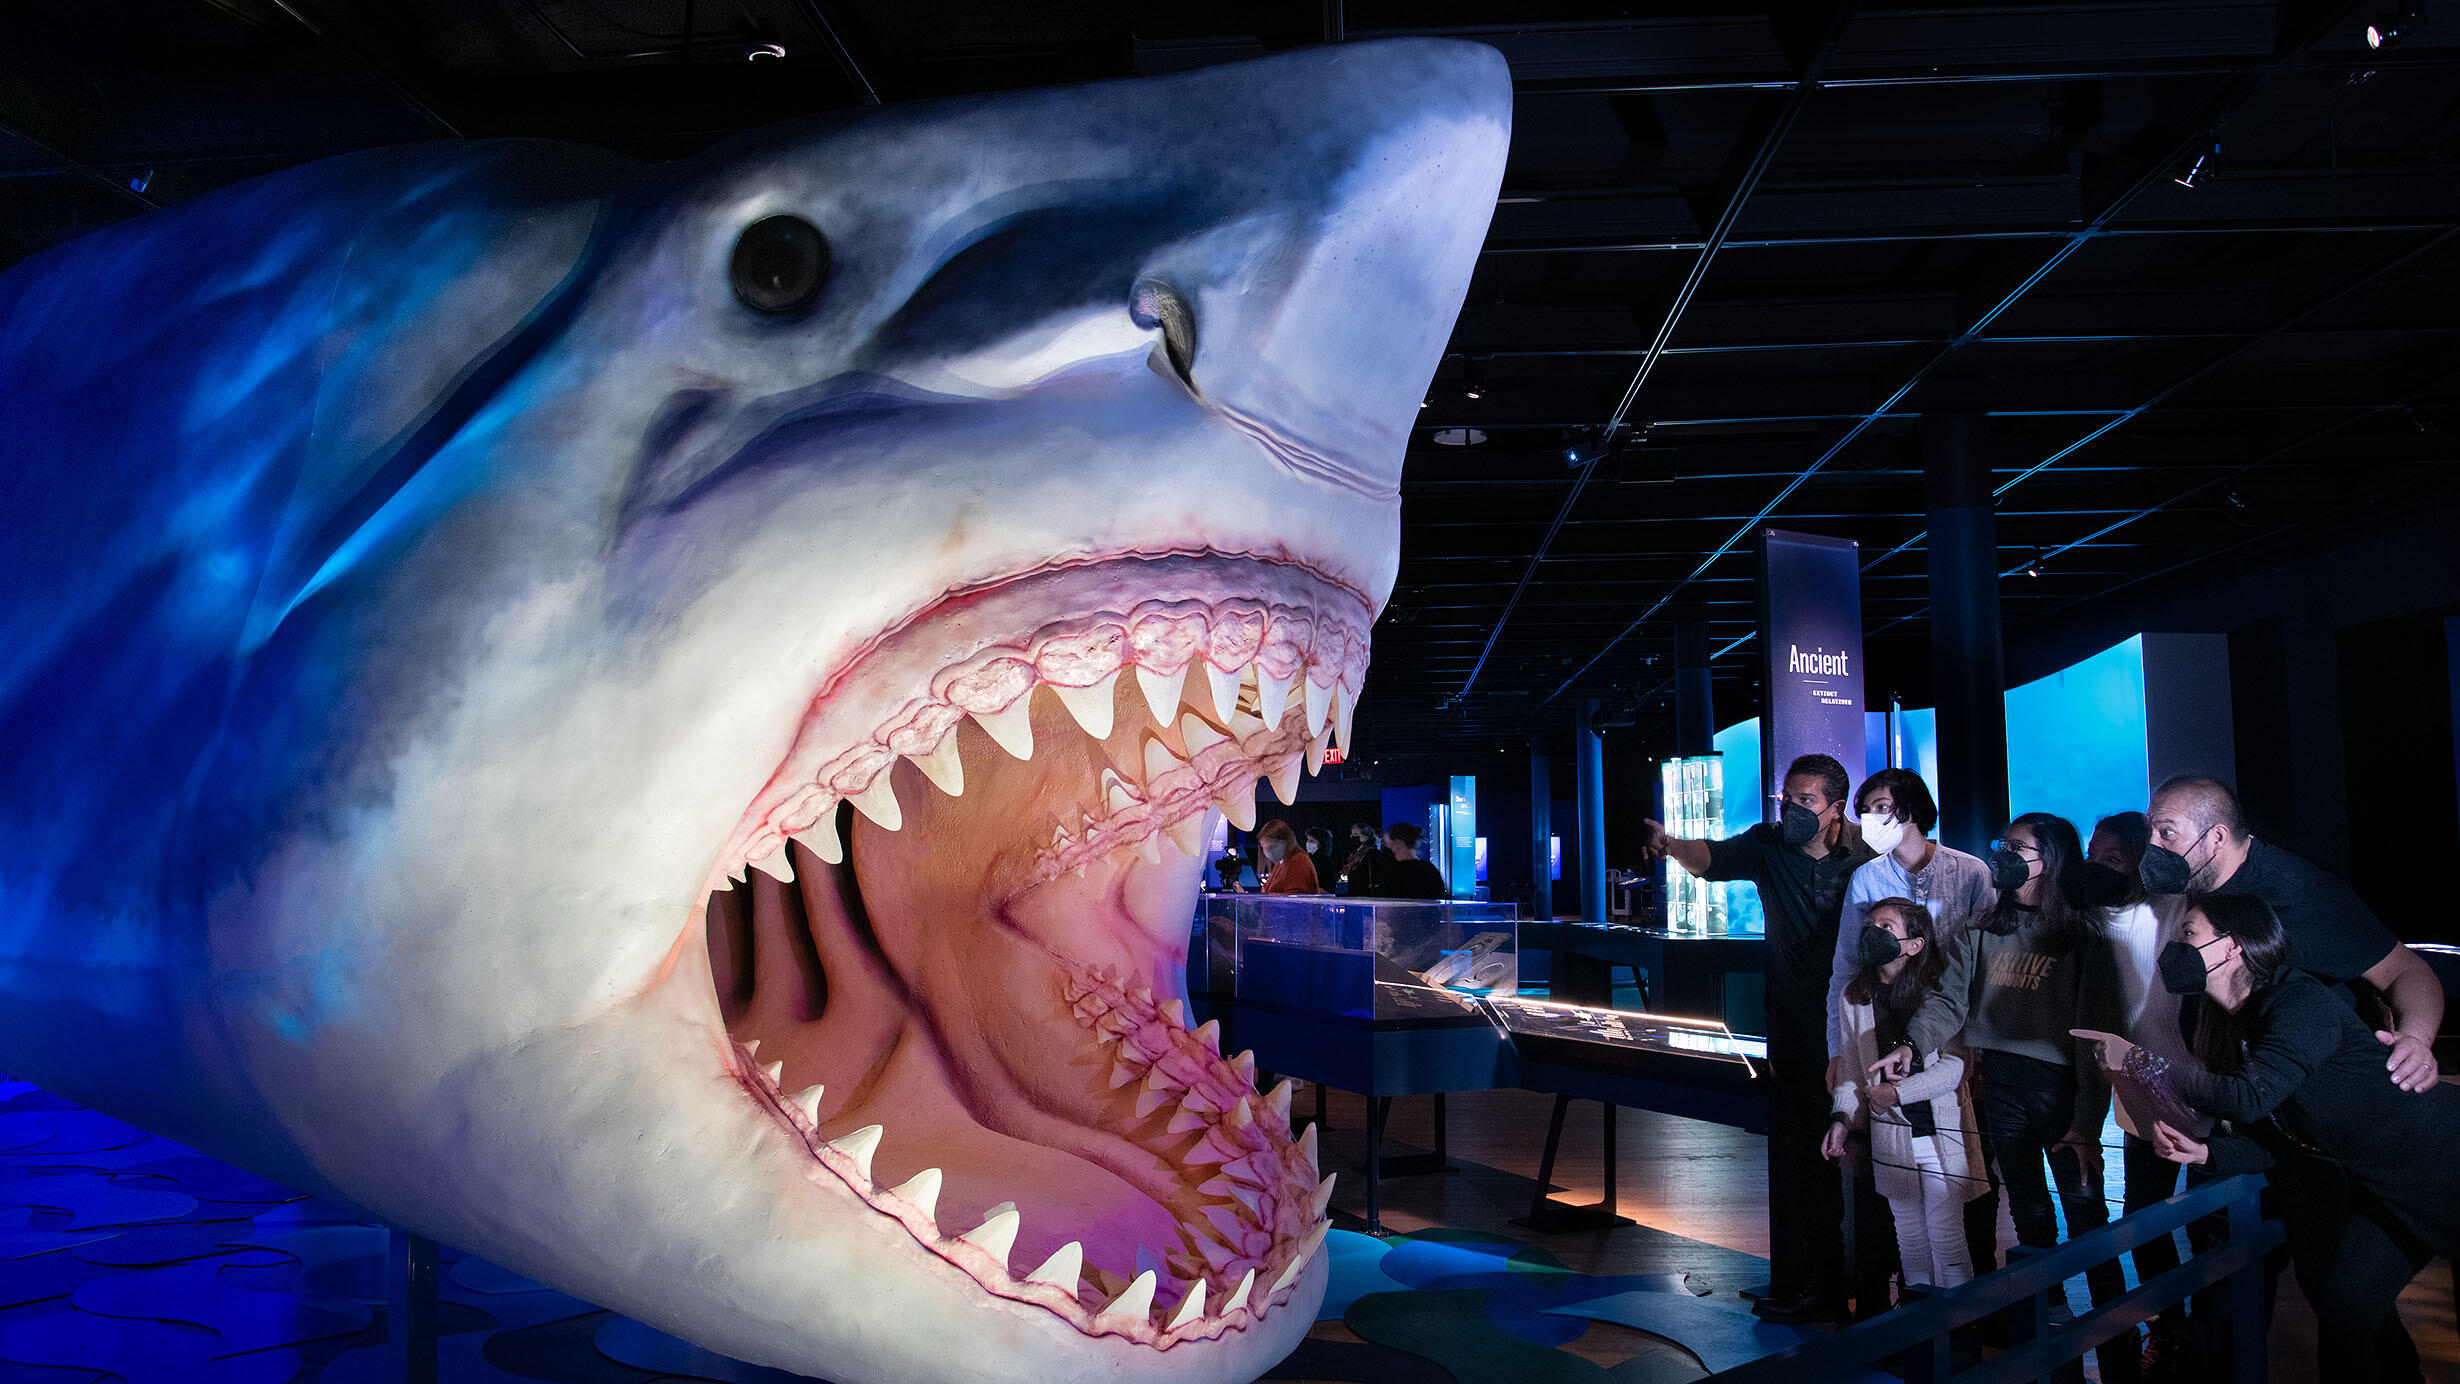 A small group of visitors looks into the gaping mouth of a life-sized megalodon model.